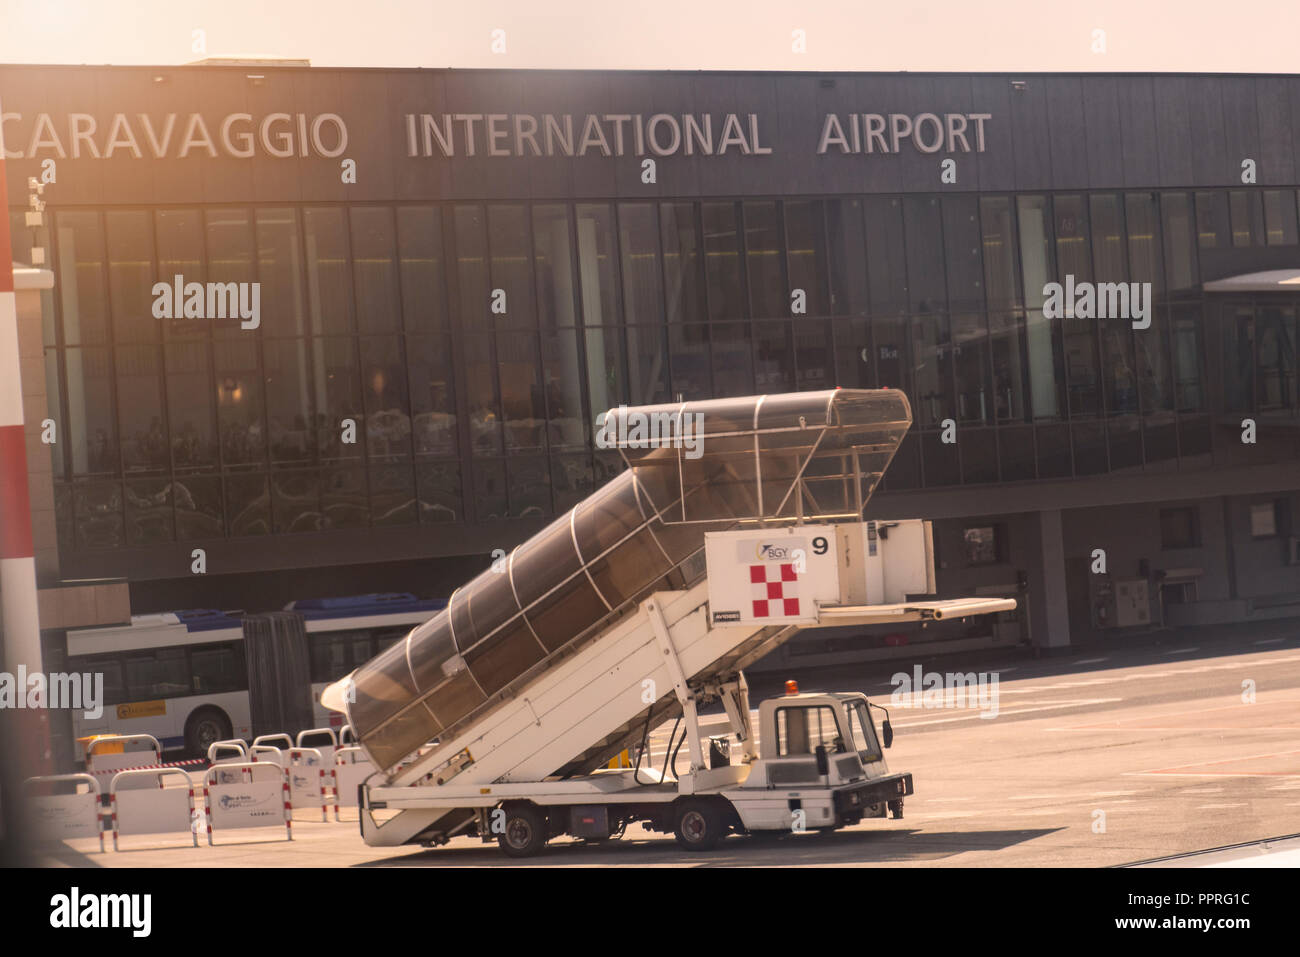 Italy, the airport of Cavaraggio. 02, 06,2018. Gangway for the plane near the airport. Stock Photo